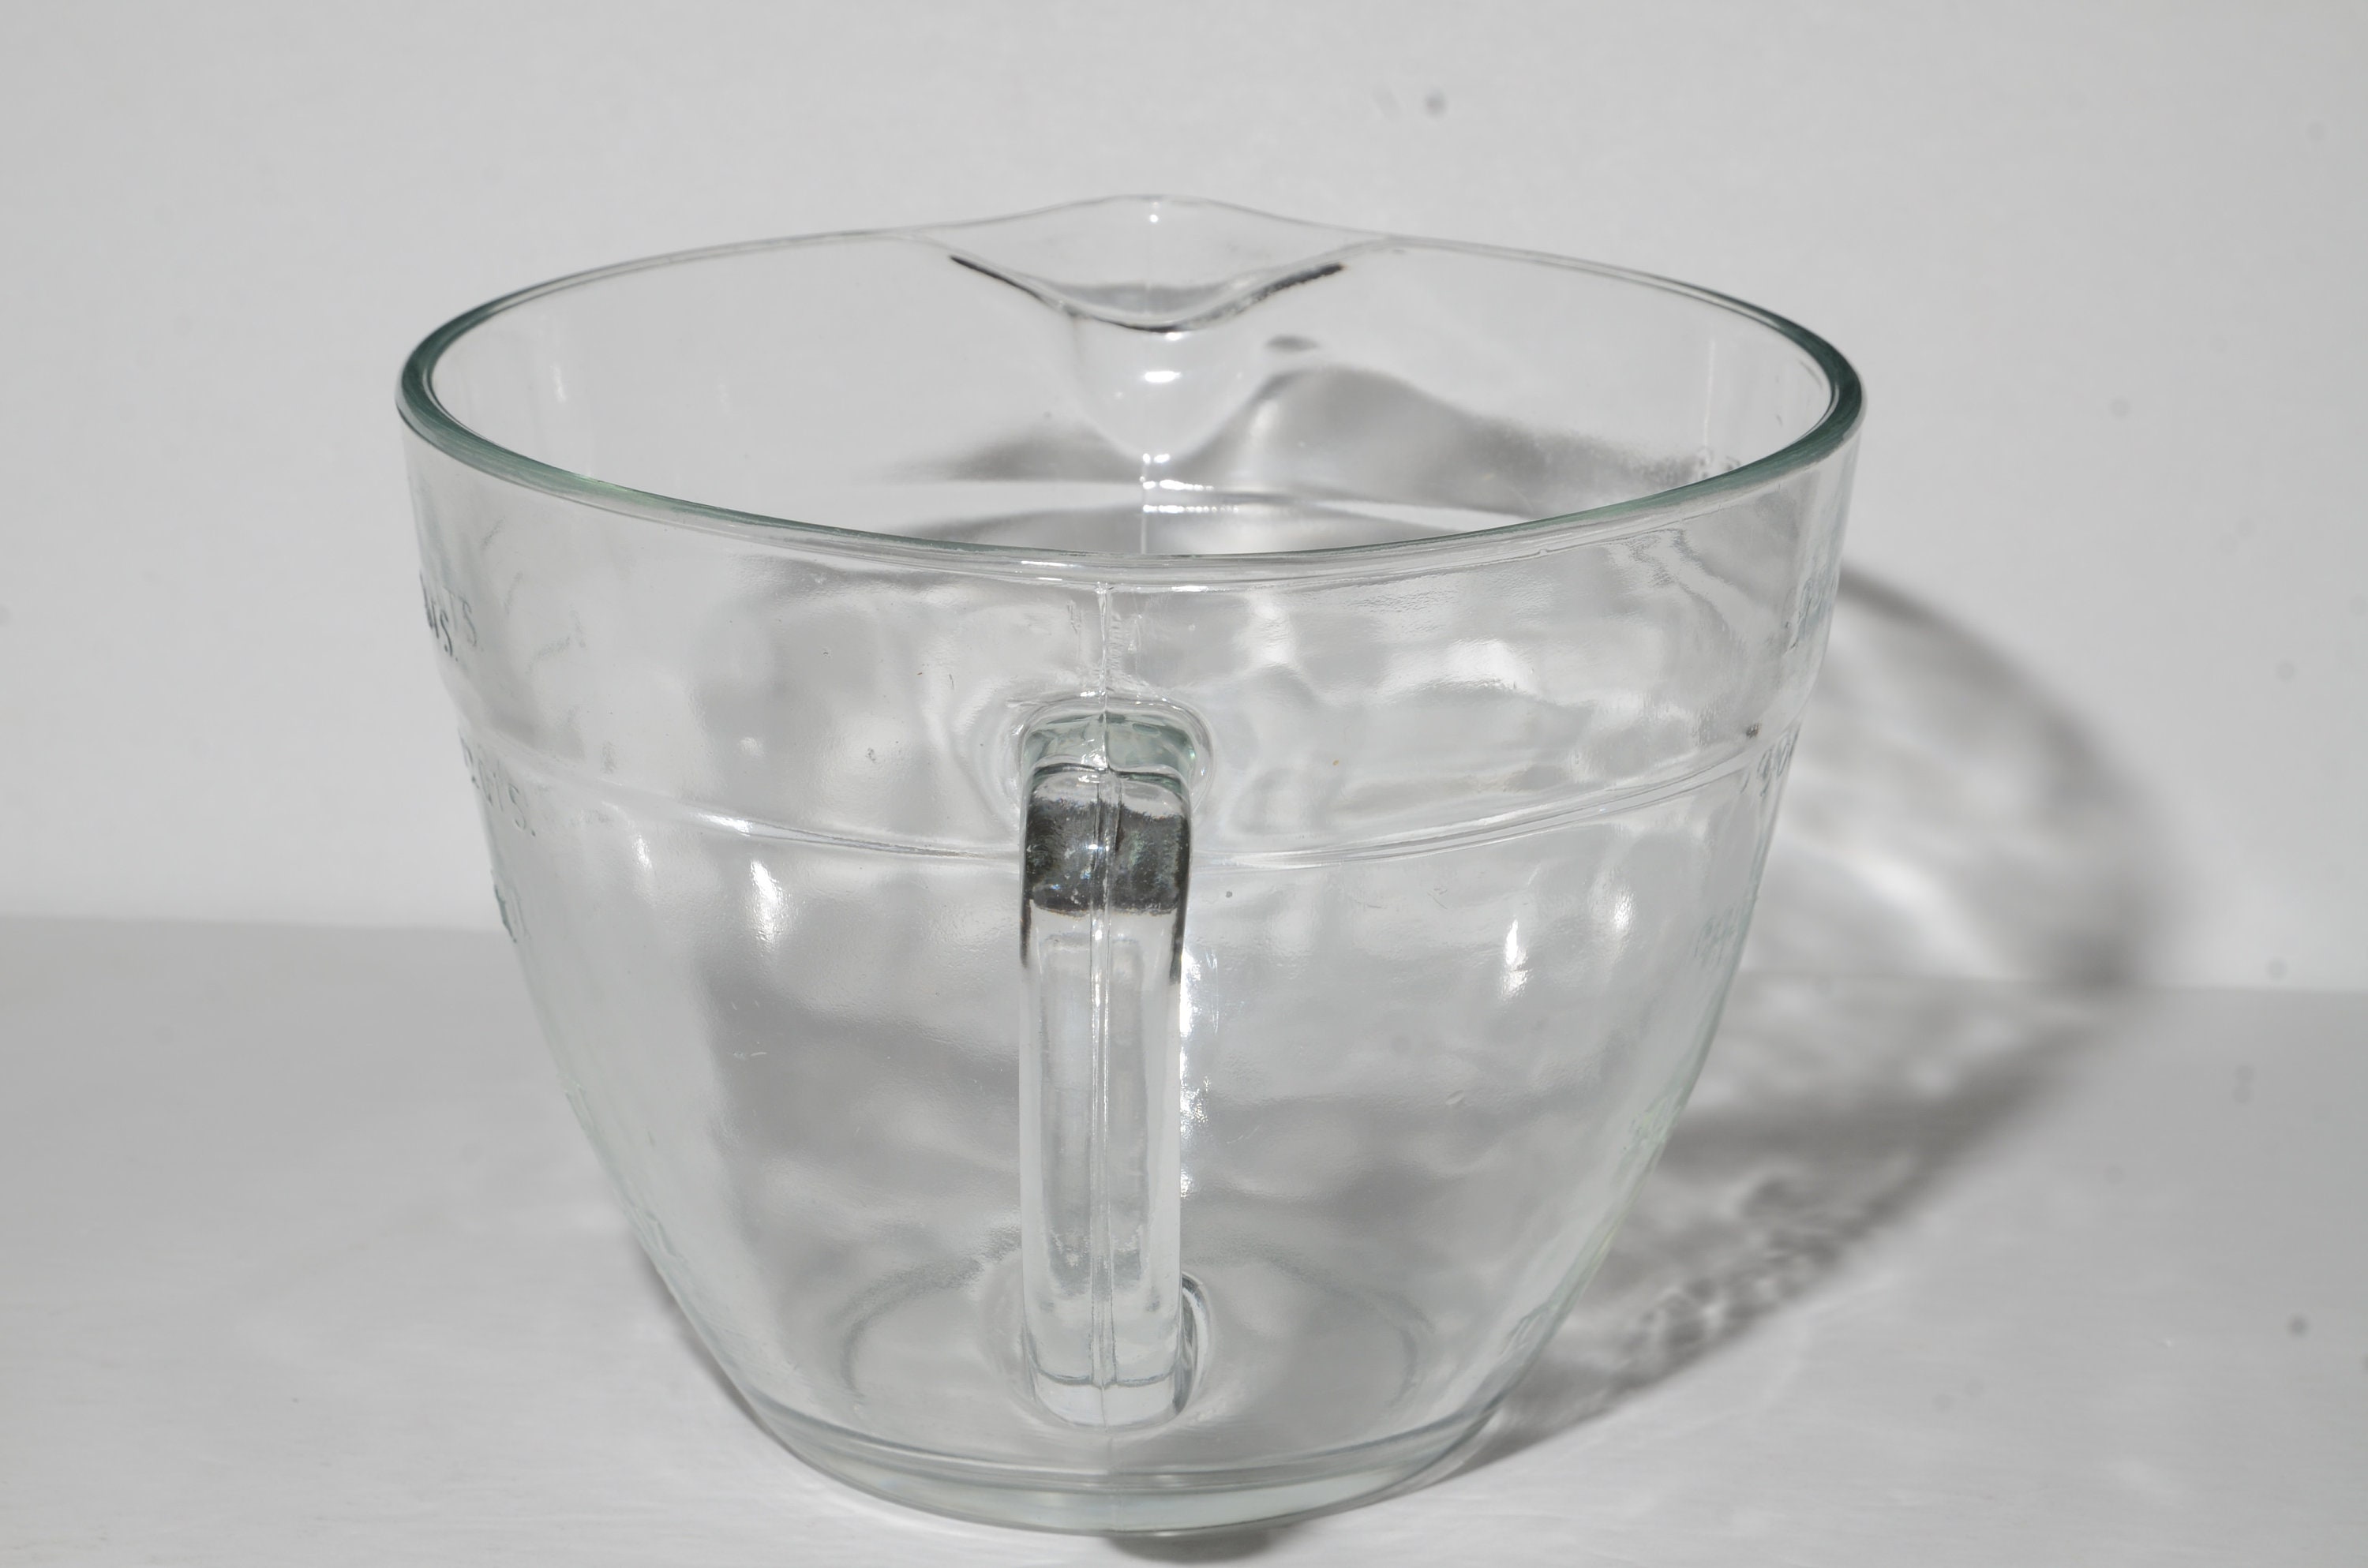 Anchor Hocking 2 Quart Measuring Cup BADLY ETCHED Glass Batter Bowl LOW!  PRICE!